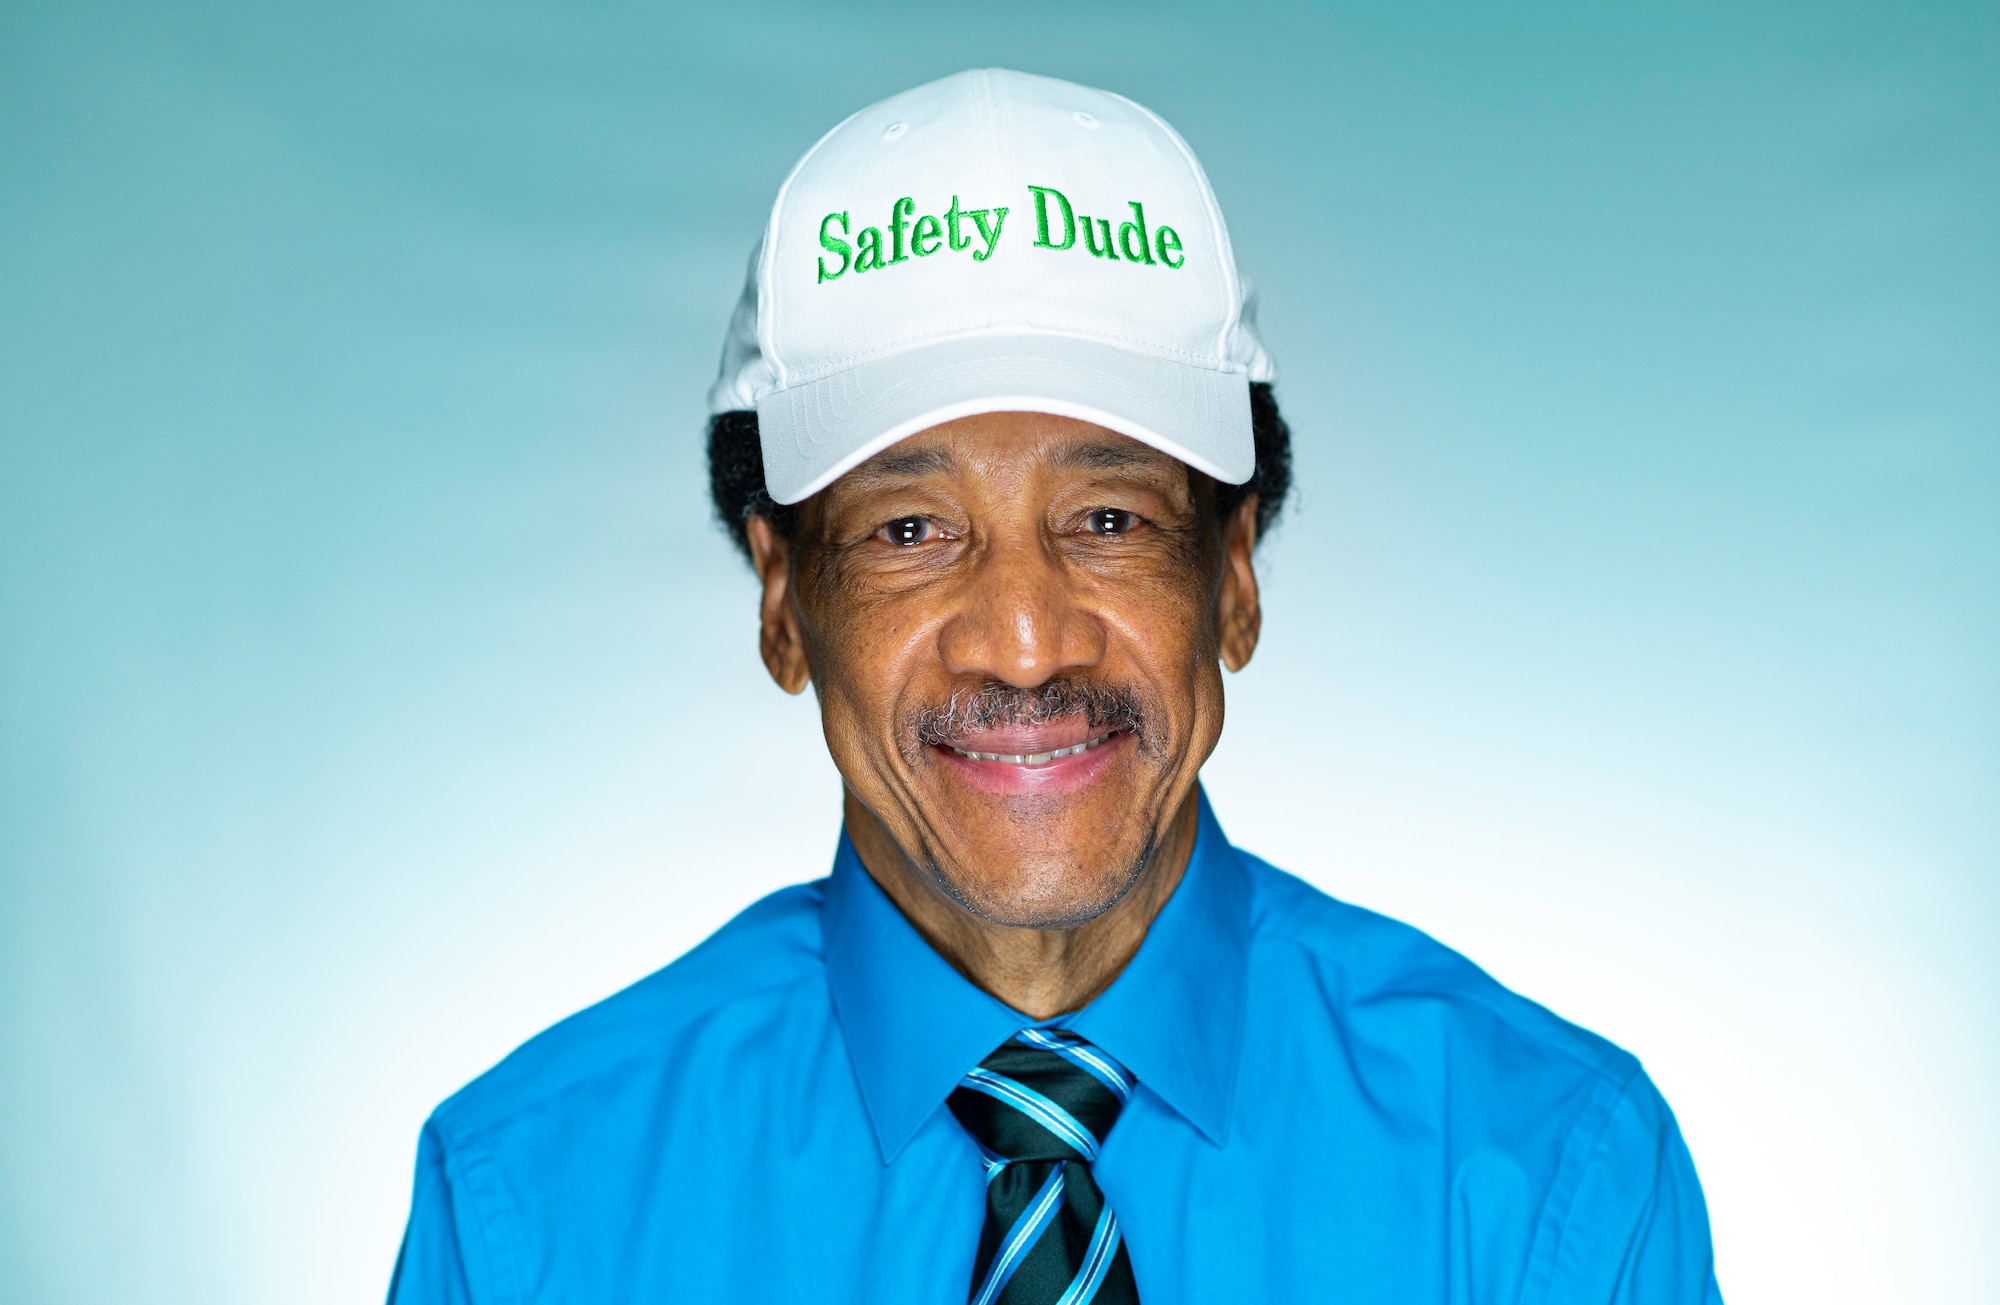 Bernard “Safety Dude” Bruce, U.S. Air Force retired 56th Fighter Wing Occupational Safety and Health manager, wears his ‘Safety Dude’ hat July 30, 2021, at Luke Air Force Base, Arizona. Bruce retired after a combined service of more than 50 years to the Air Force--26 years of active duty and 24 years as a government-service employee. During his time with the Air Force Bruce held many roles including being an Air Traffic Controller in the Vietnam War, a radio host for Air Force’s Radio and Television Network, the 56th Fighter Wing Occupational Safety and Health manager and the historian for the local Tuskegee Airmen Incorporated chapter. (U.S. Air Force photo by Senior Airman Leala Marquez)